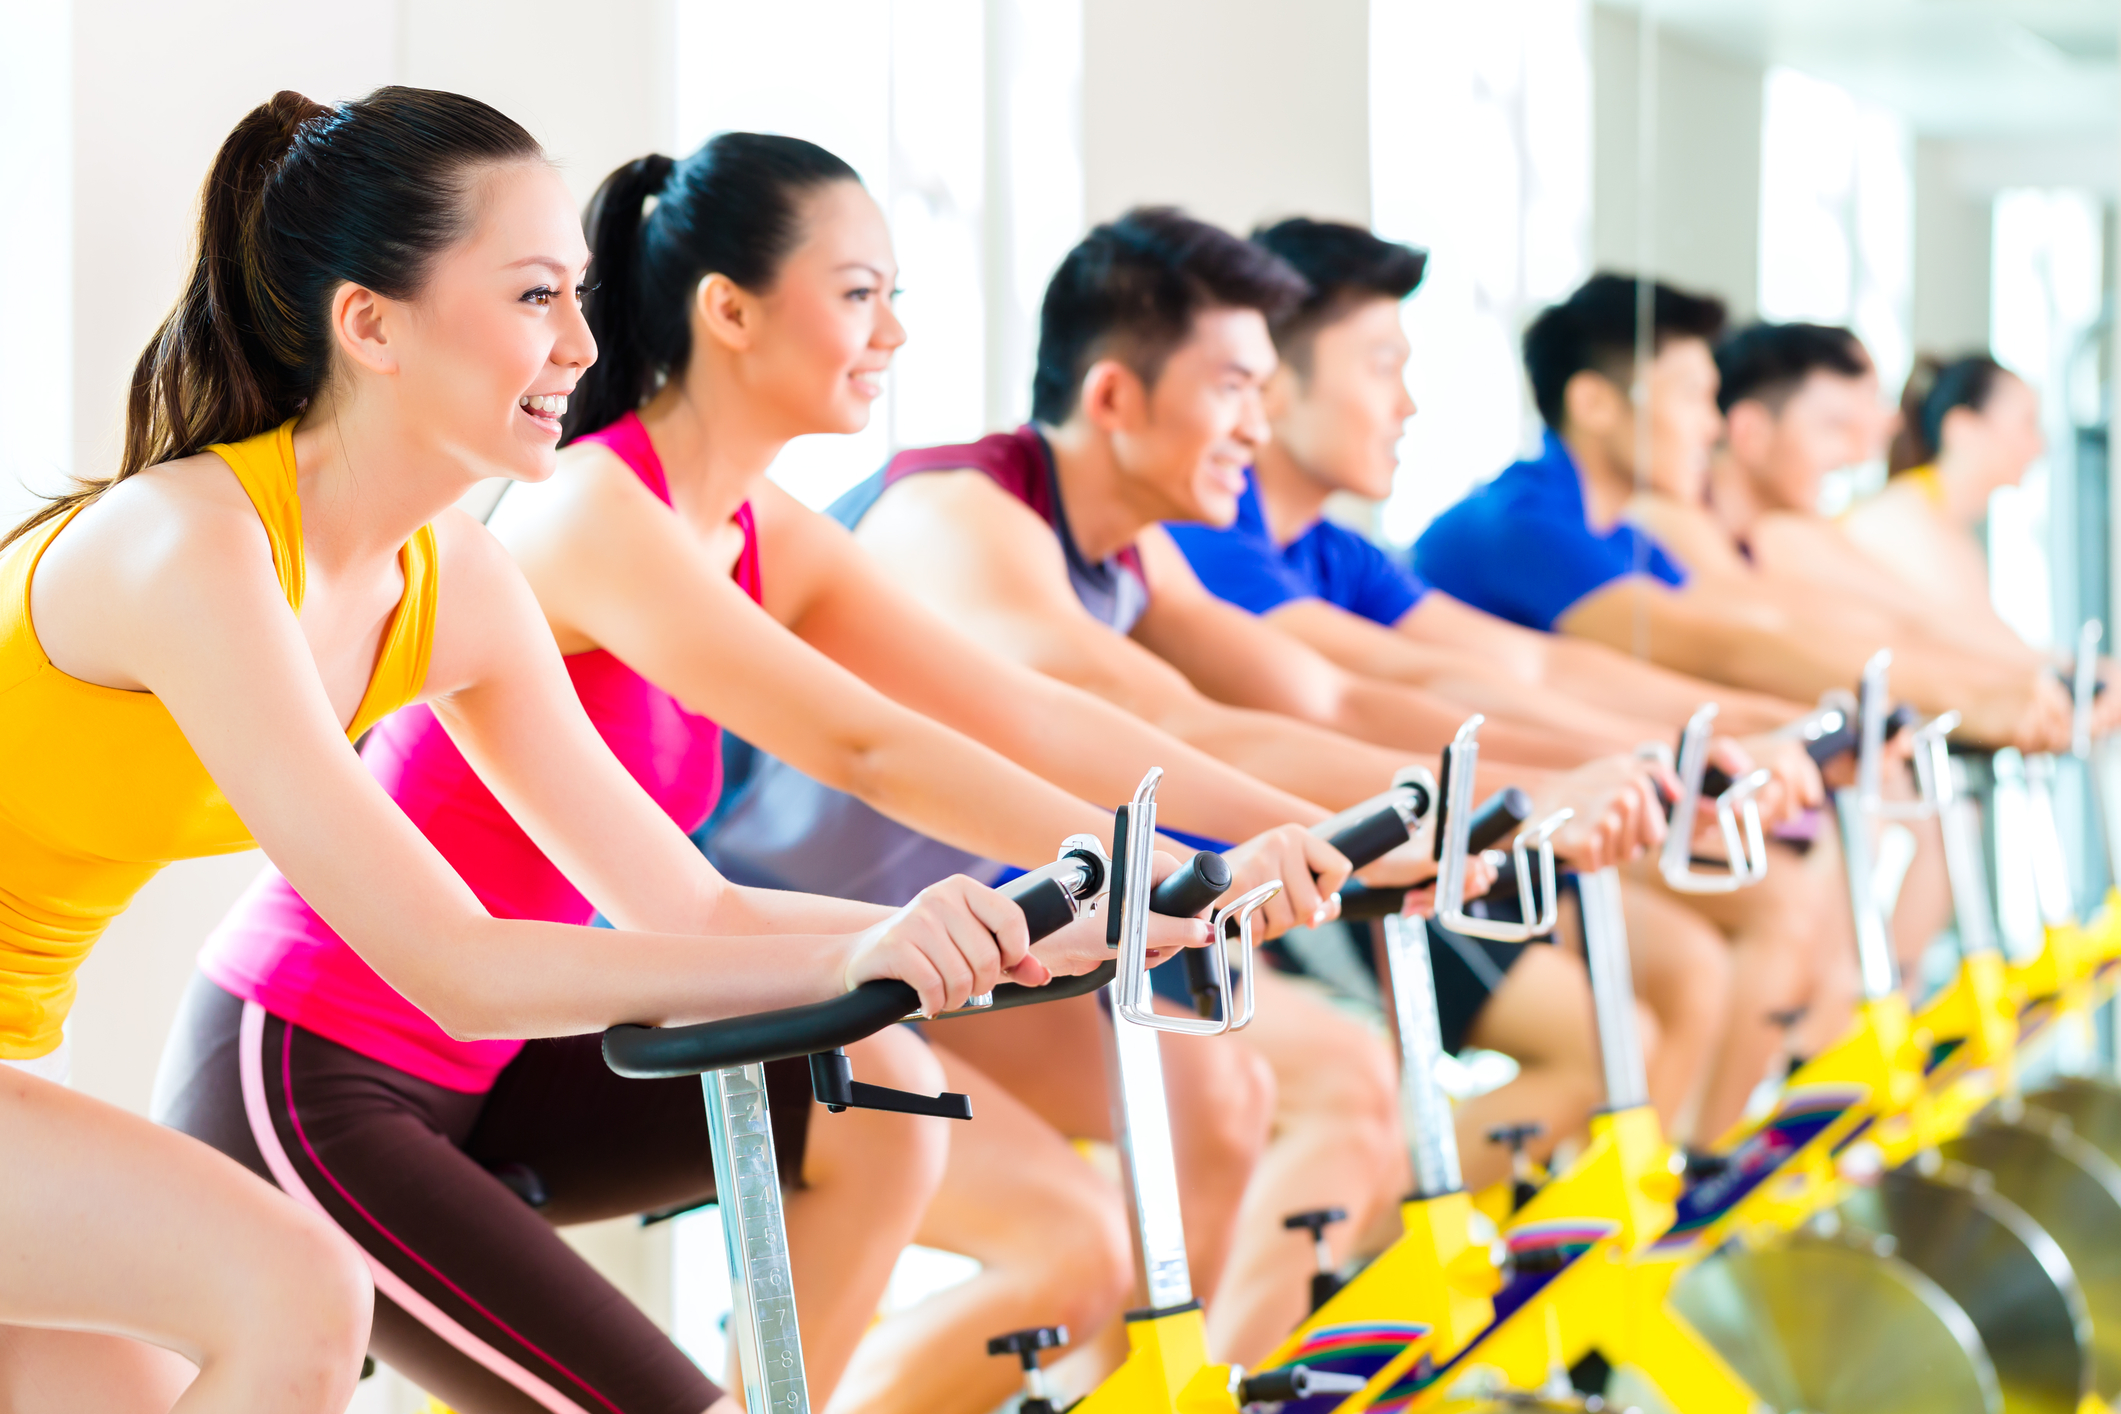 Take spinning classes to lead a healthy and active lifestyle.